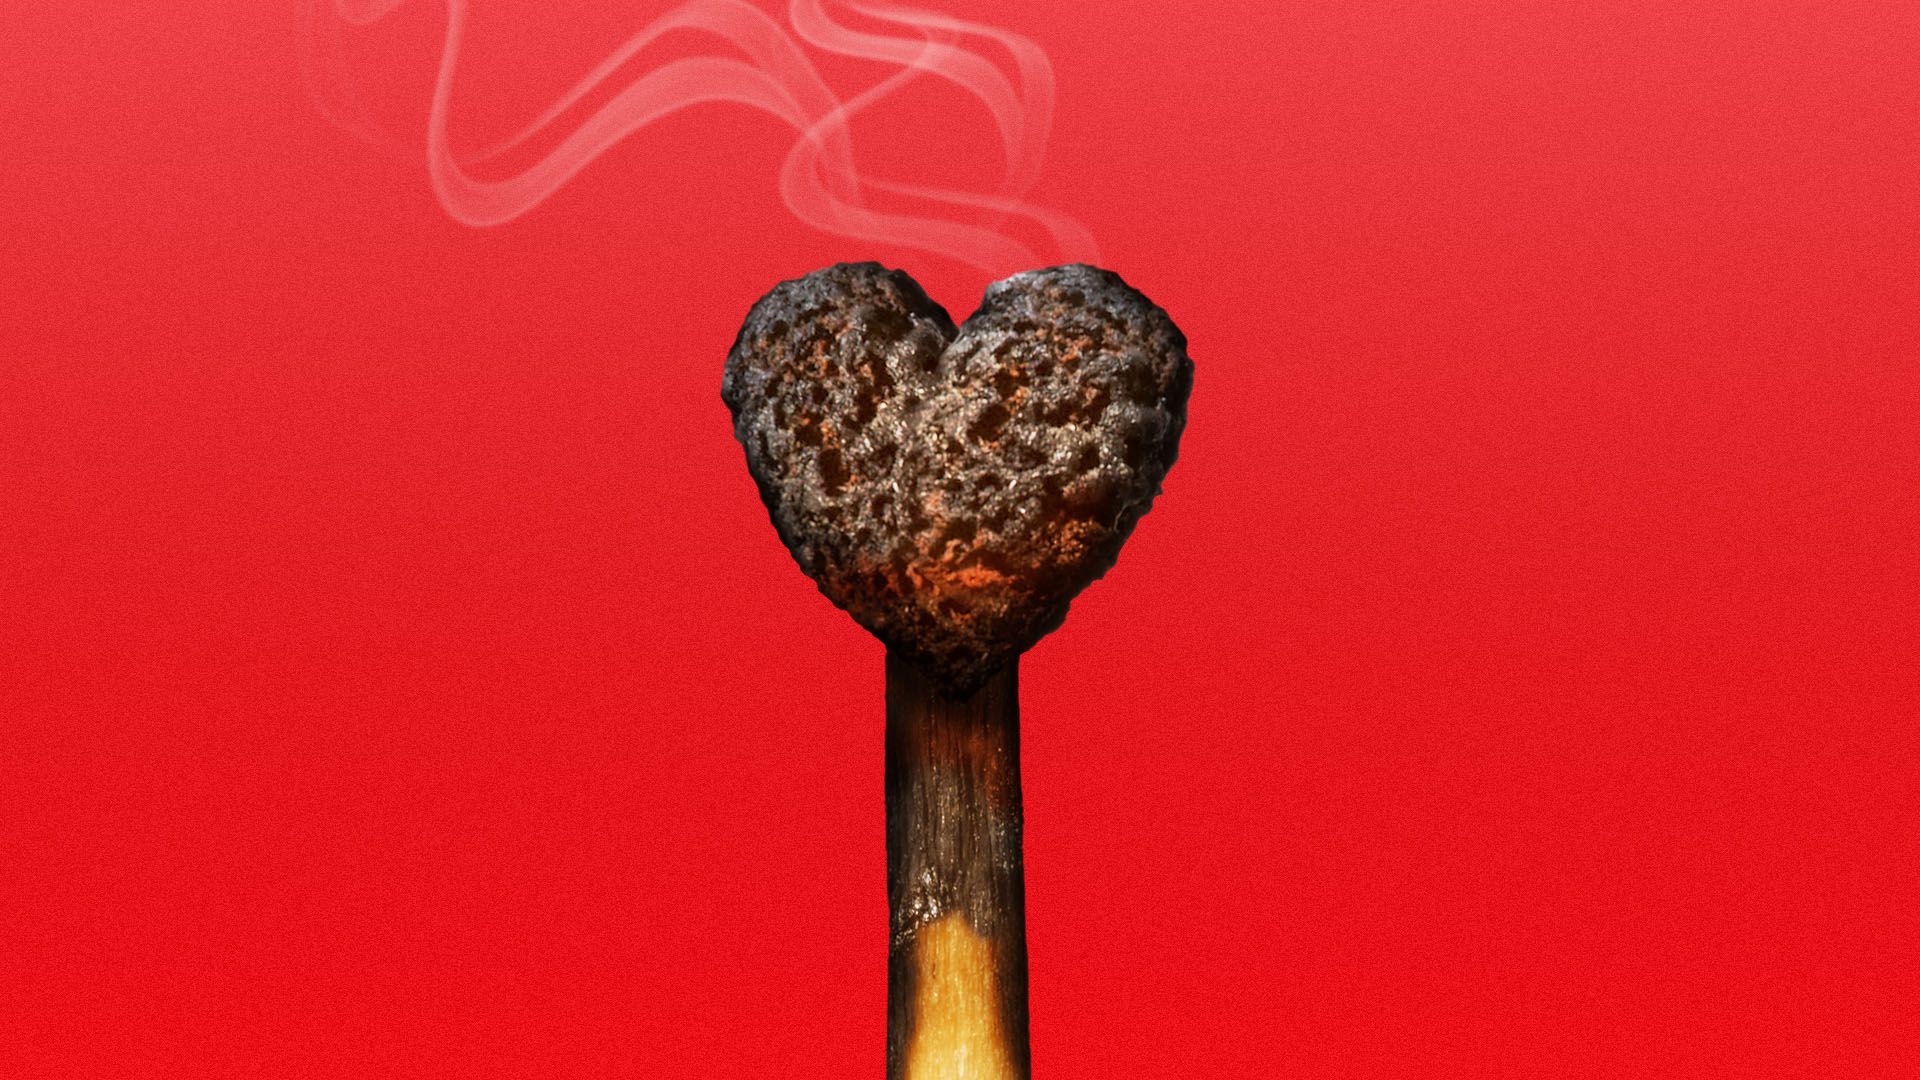 Illustration of a burned out match match in the shape of a heart